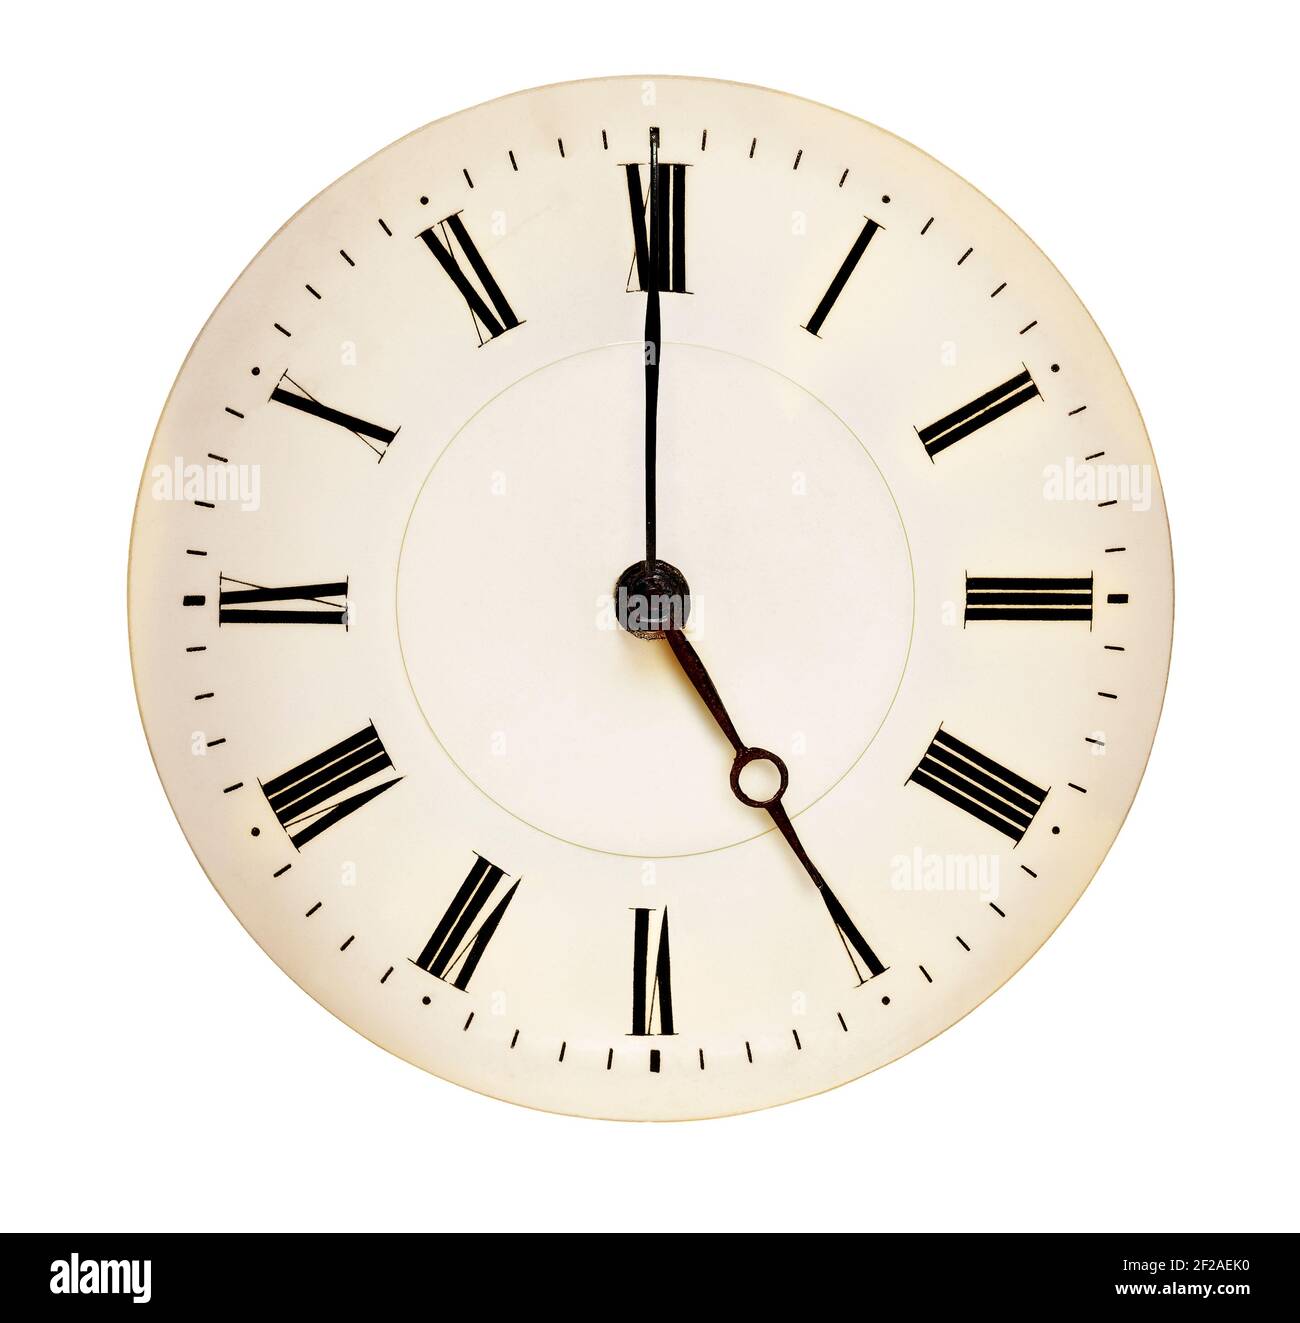 Antique clock face pointing at fiveo'clock isolated against white background. Tea time concept Stock Photo